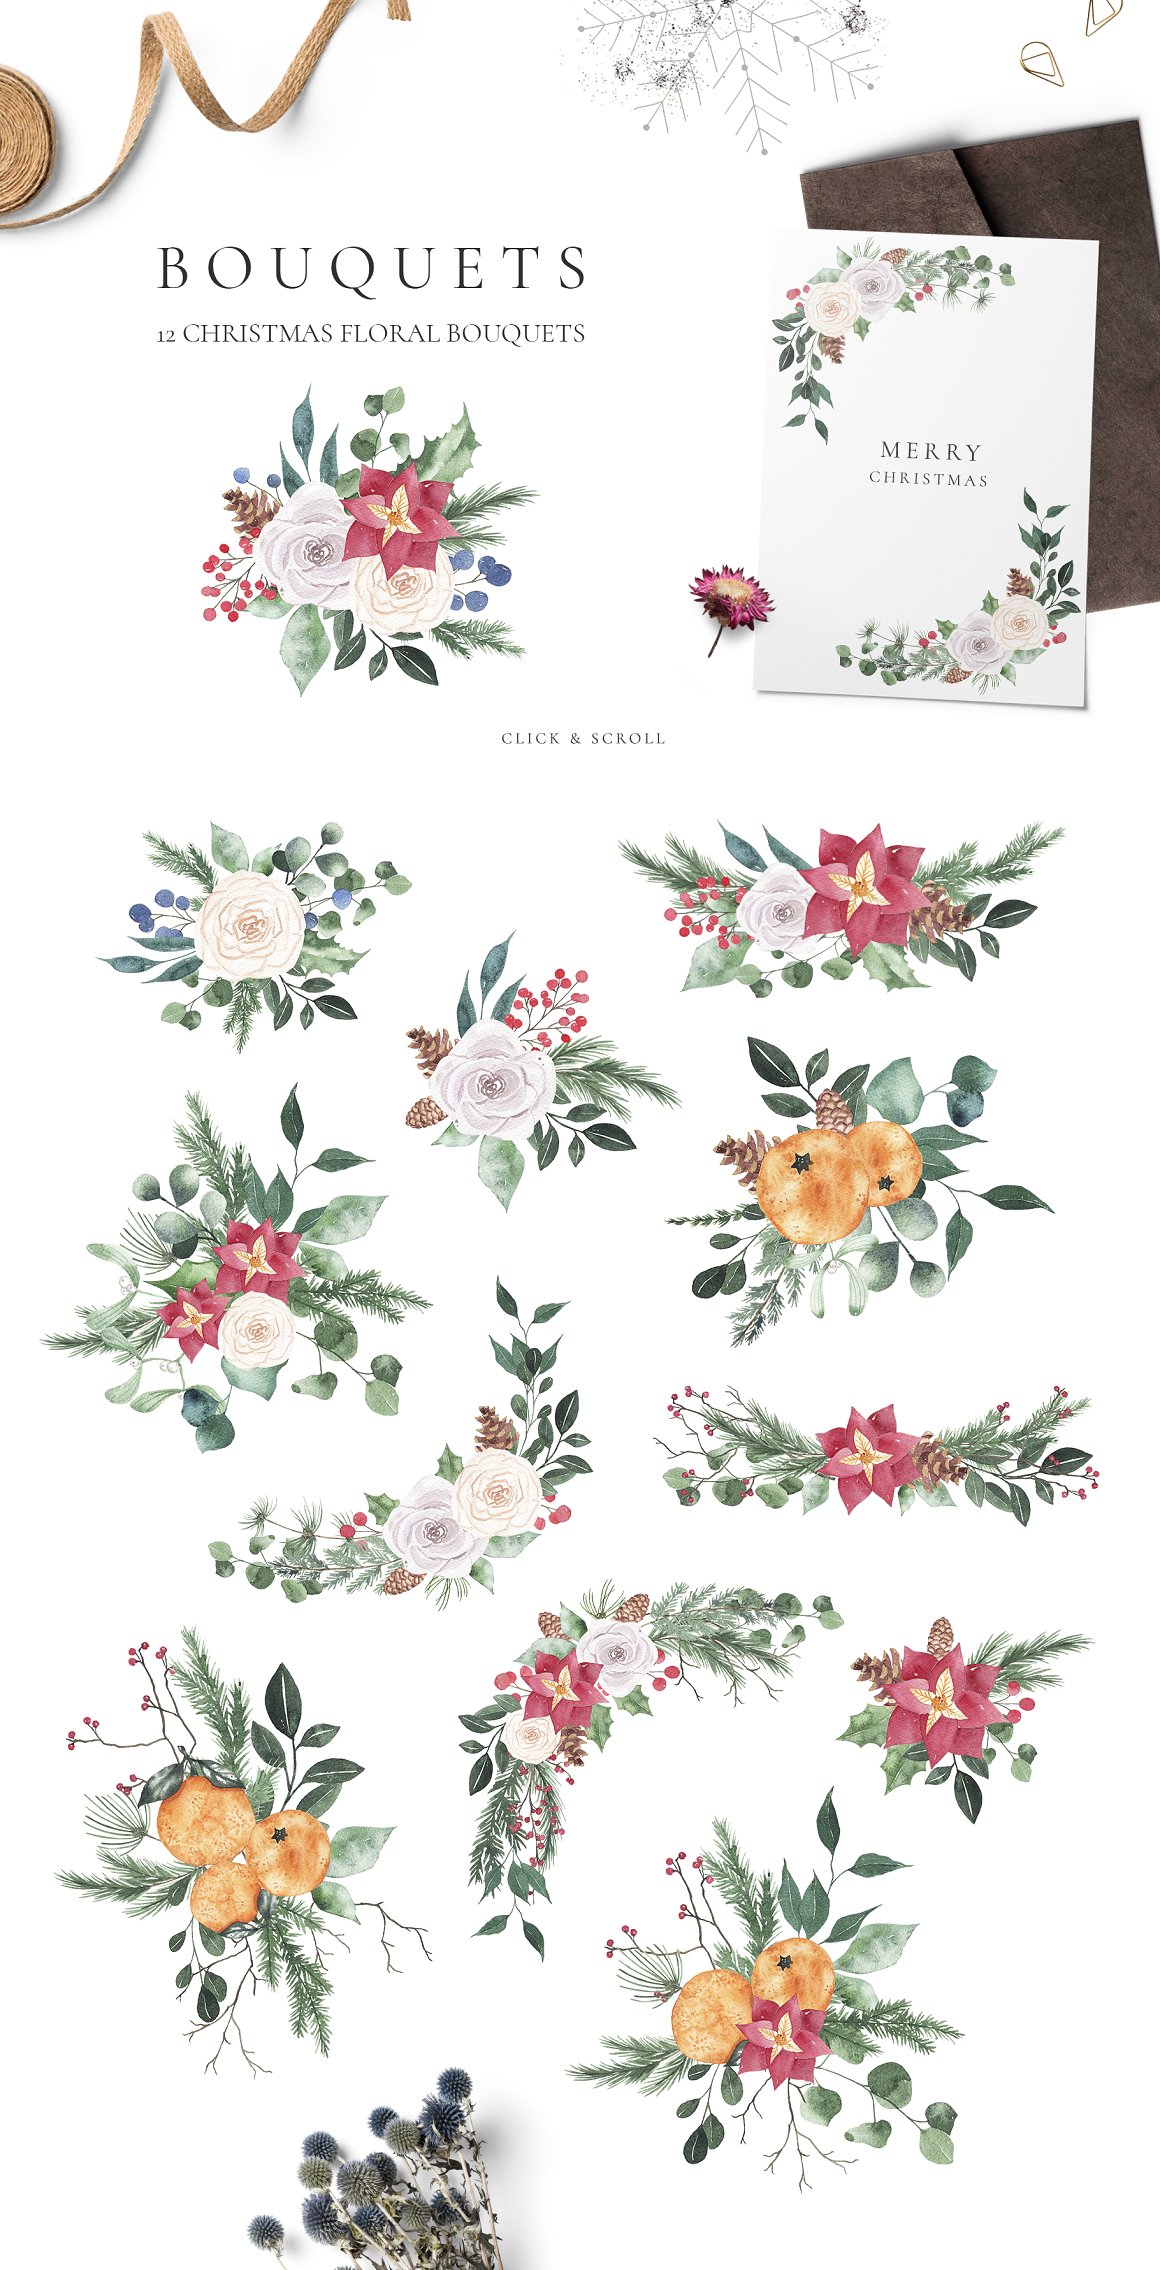 A set of different floral bouquets on a white background.